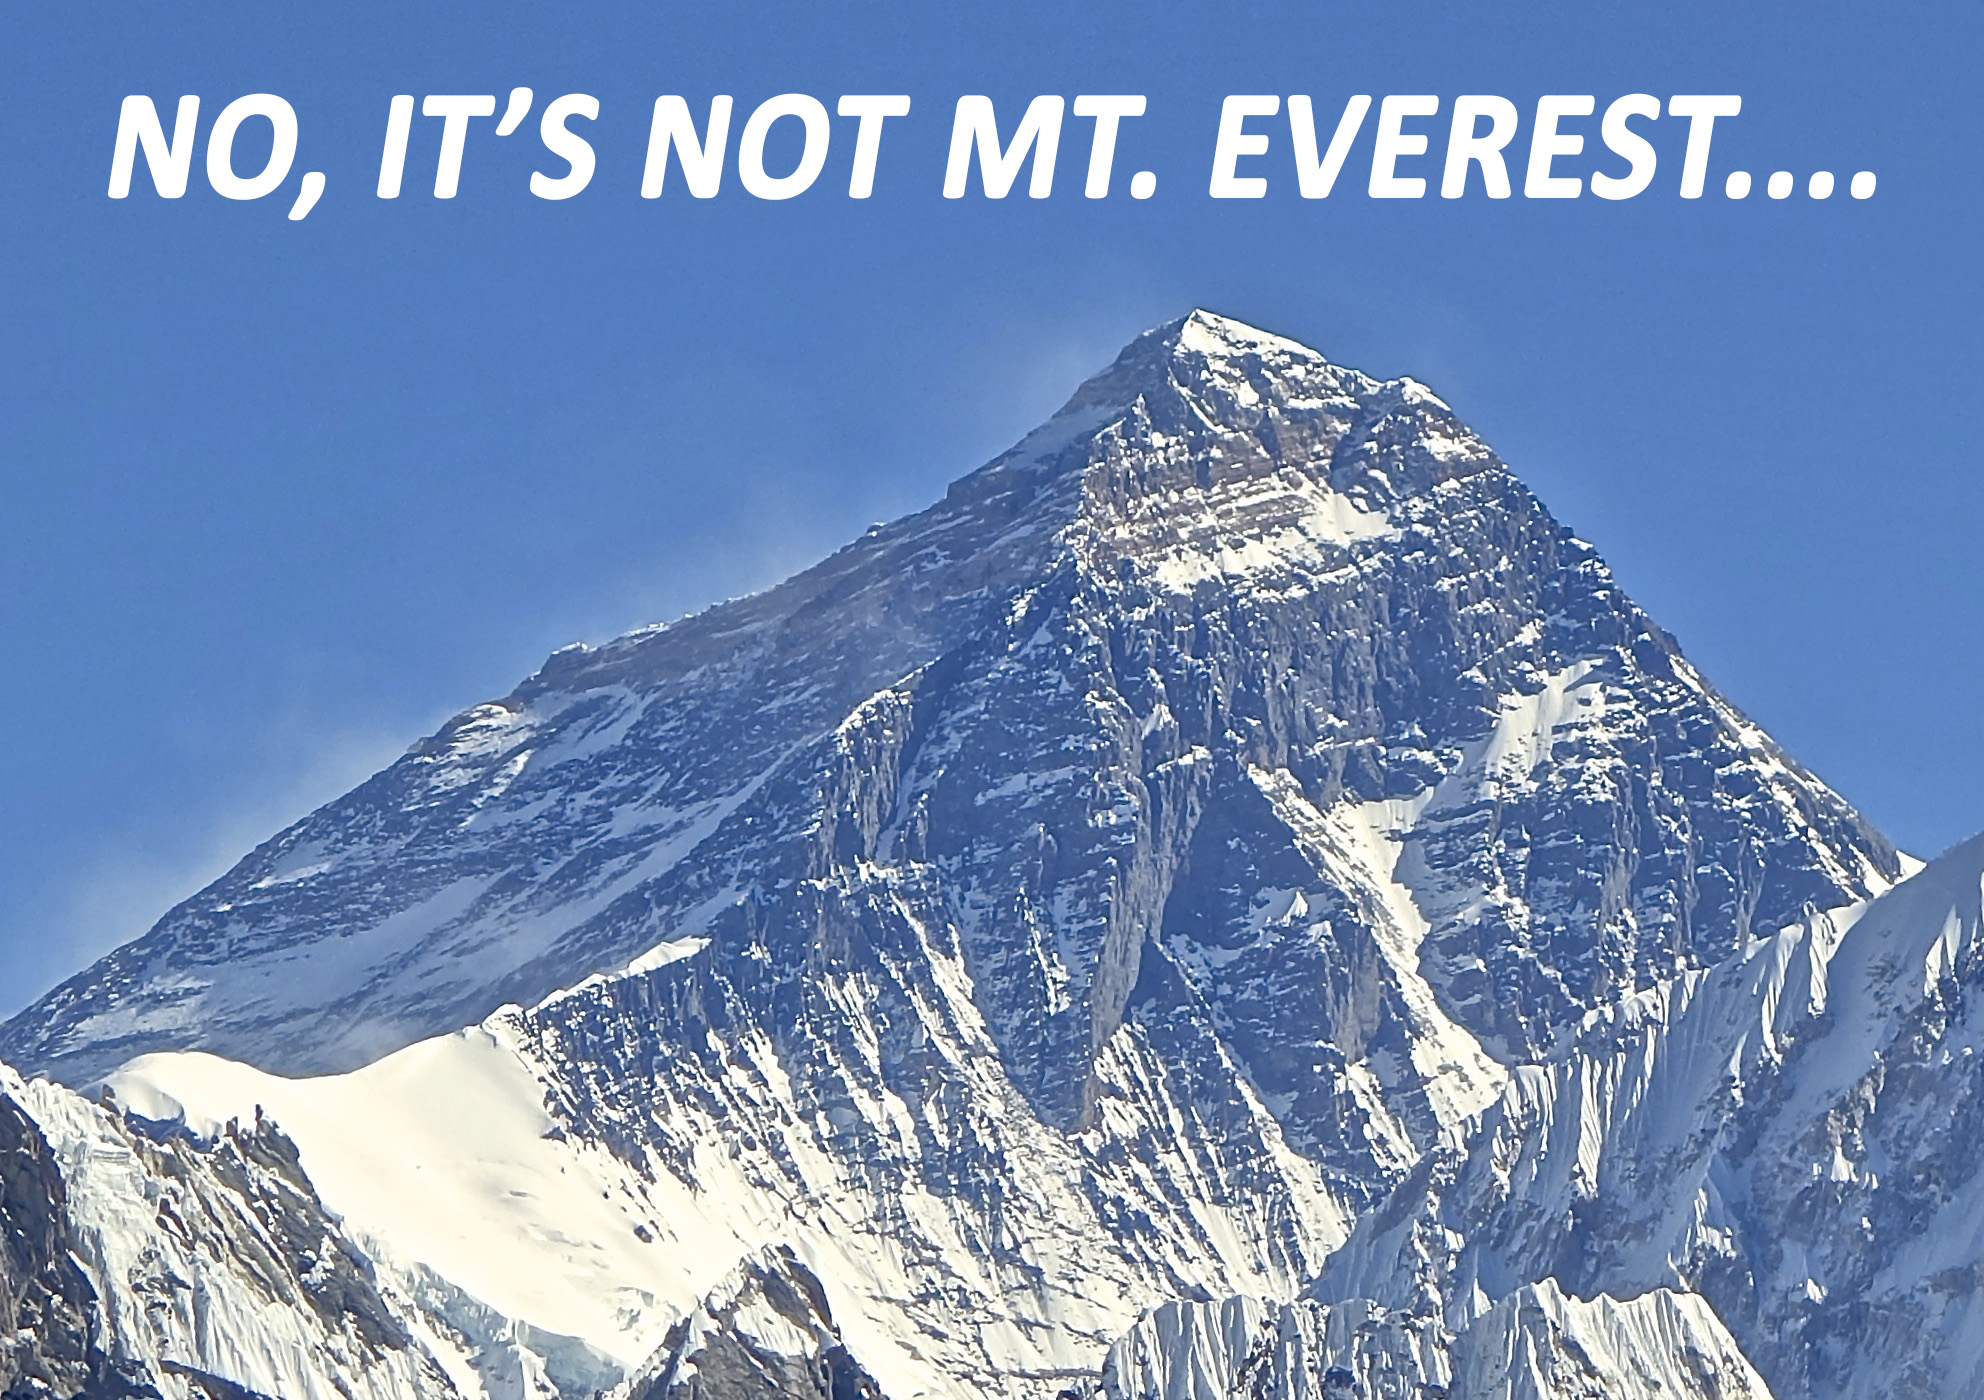 What's the tallest mountain in the world? Hint: it's not Mt. Everest